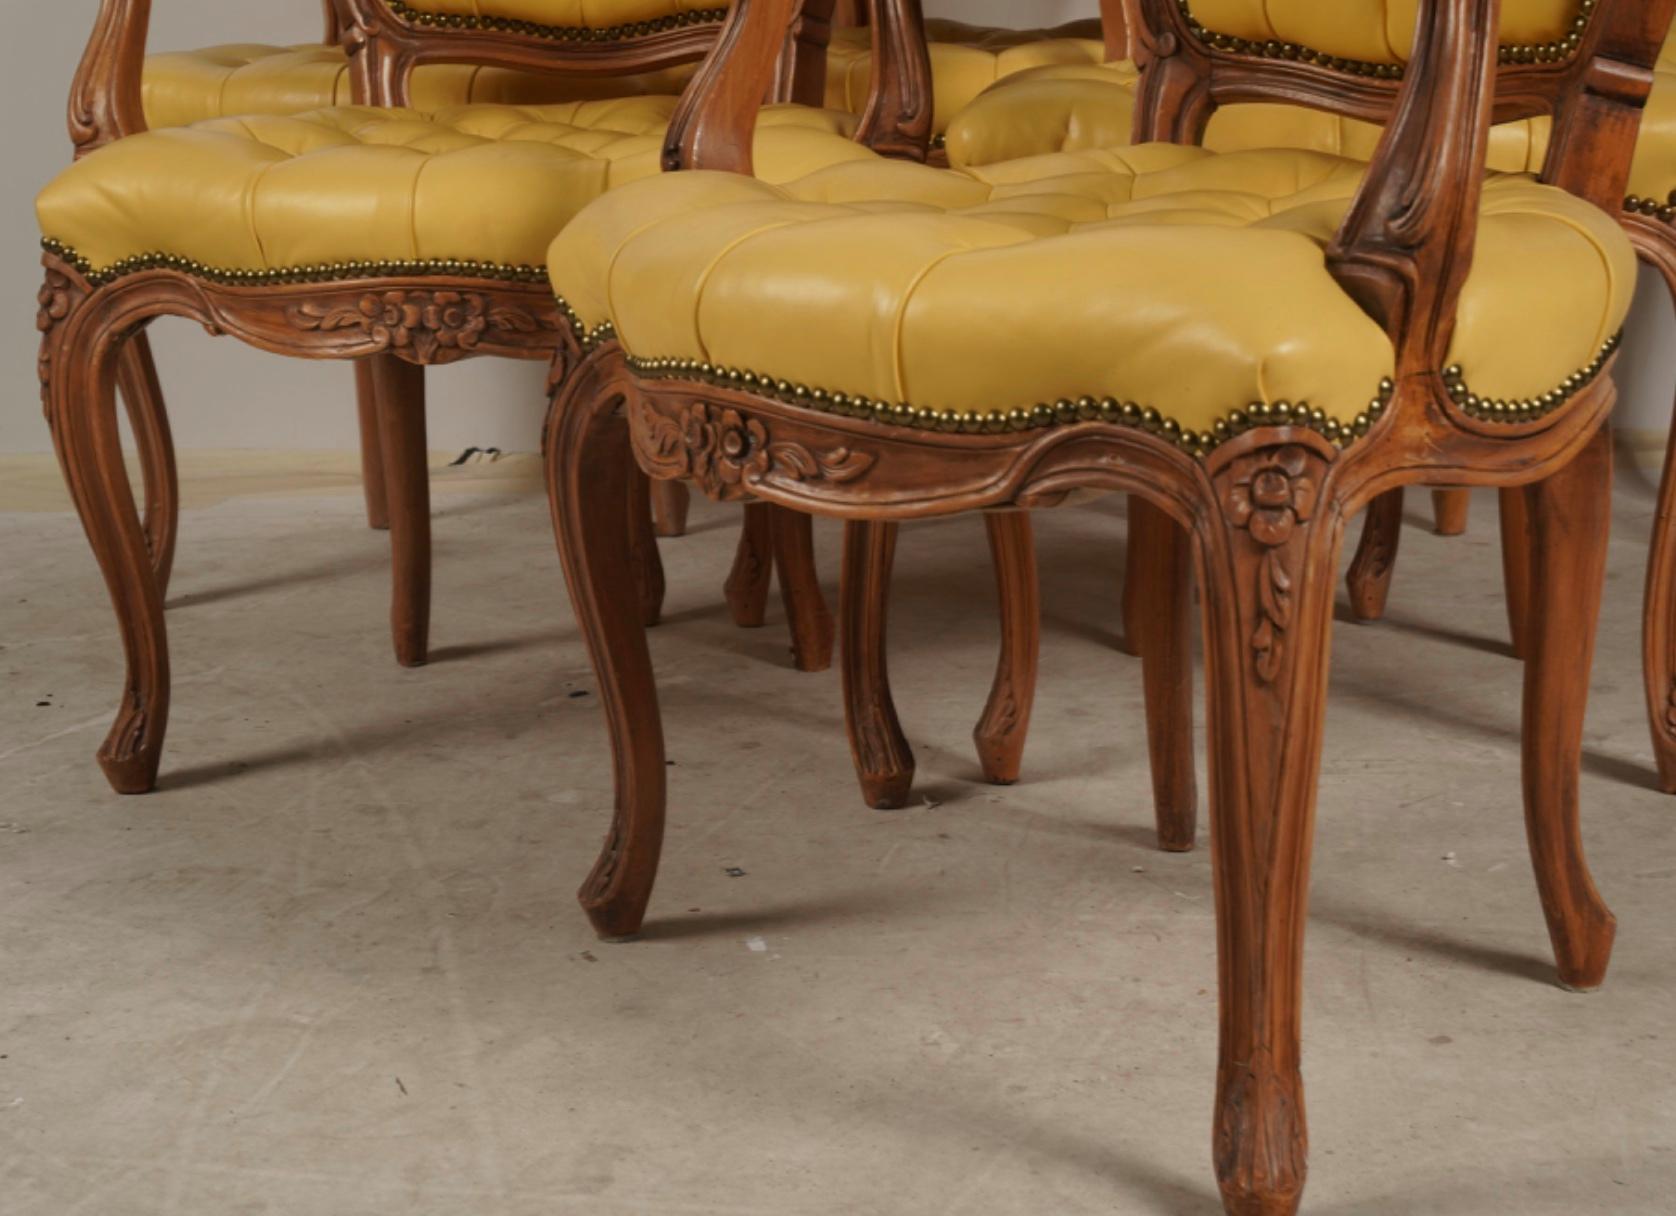 Set of 6 French Provincial Style Tufted Yellow Leather Arm Chair Fauteuils In Good Condition For Sale In LOS ANGELES, CA